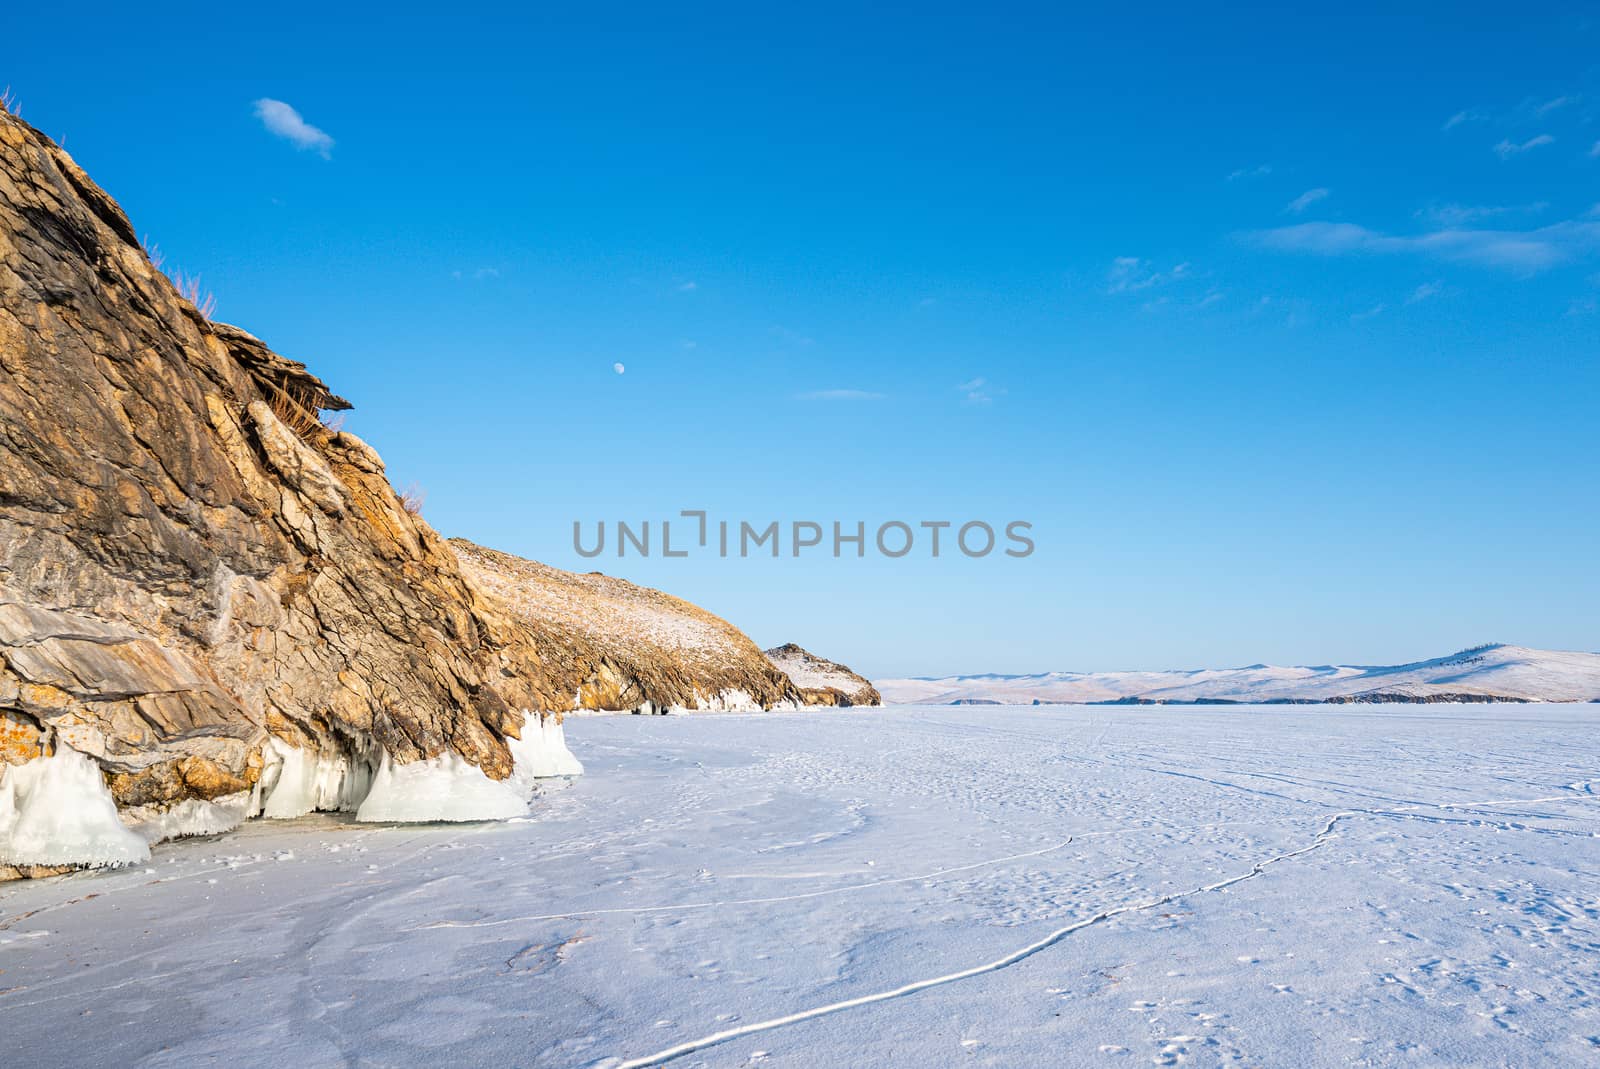 The rocky mountains are covered with snow. The blue color of the sky contrasts with the brown color of mountains and ground. Beautiful scenery of mountains, lake and skies. Lake Baikal, Russia.